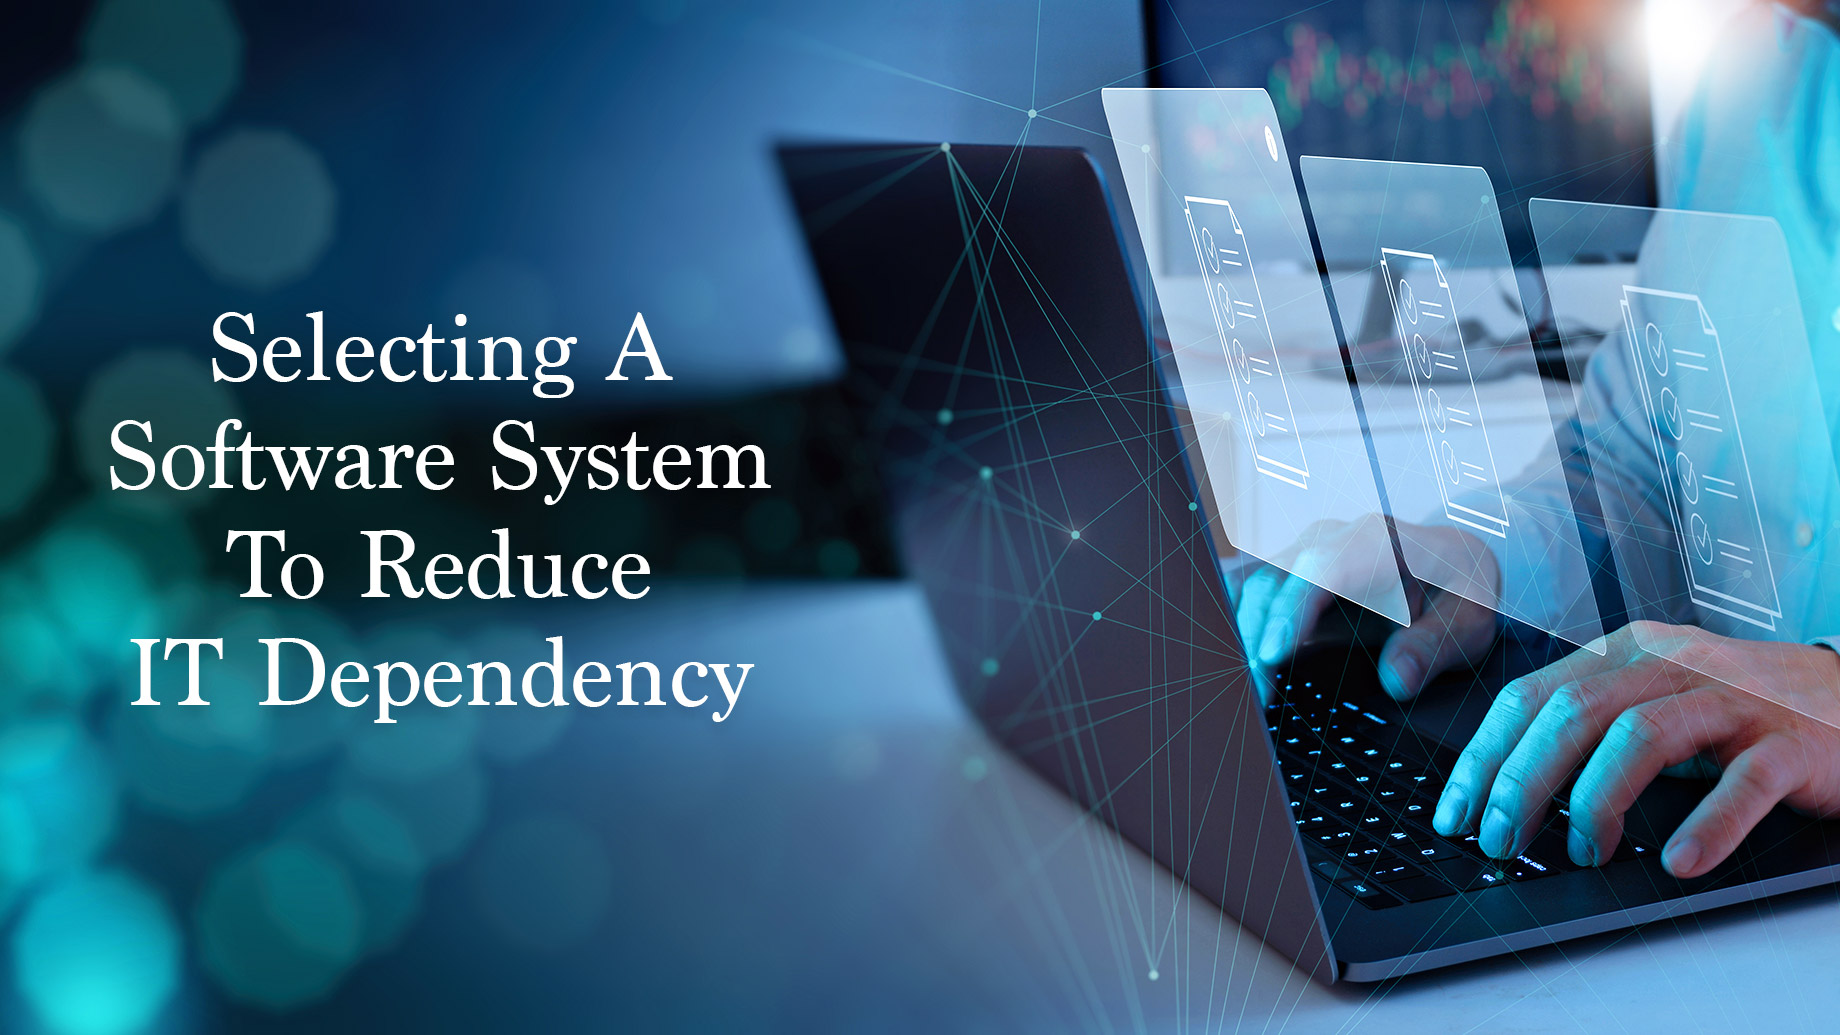 Selecting A Software System To Reduce IT Dependency